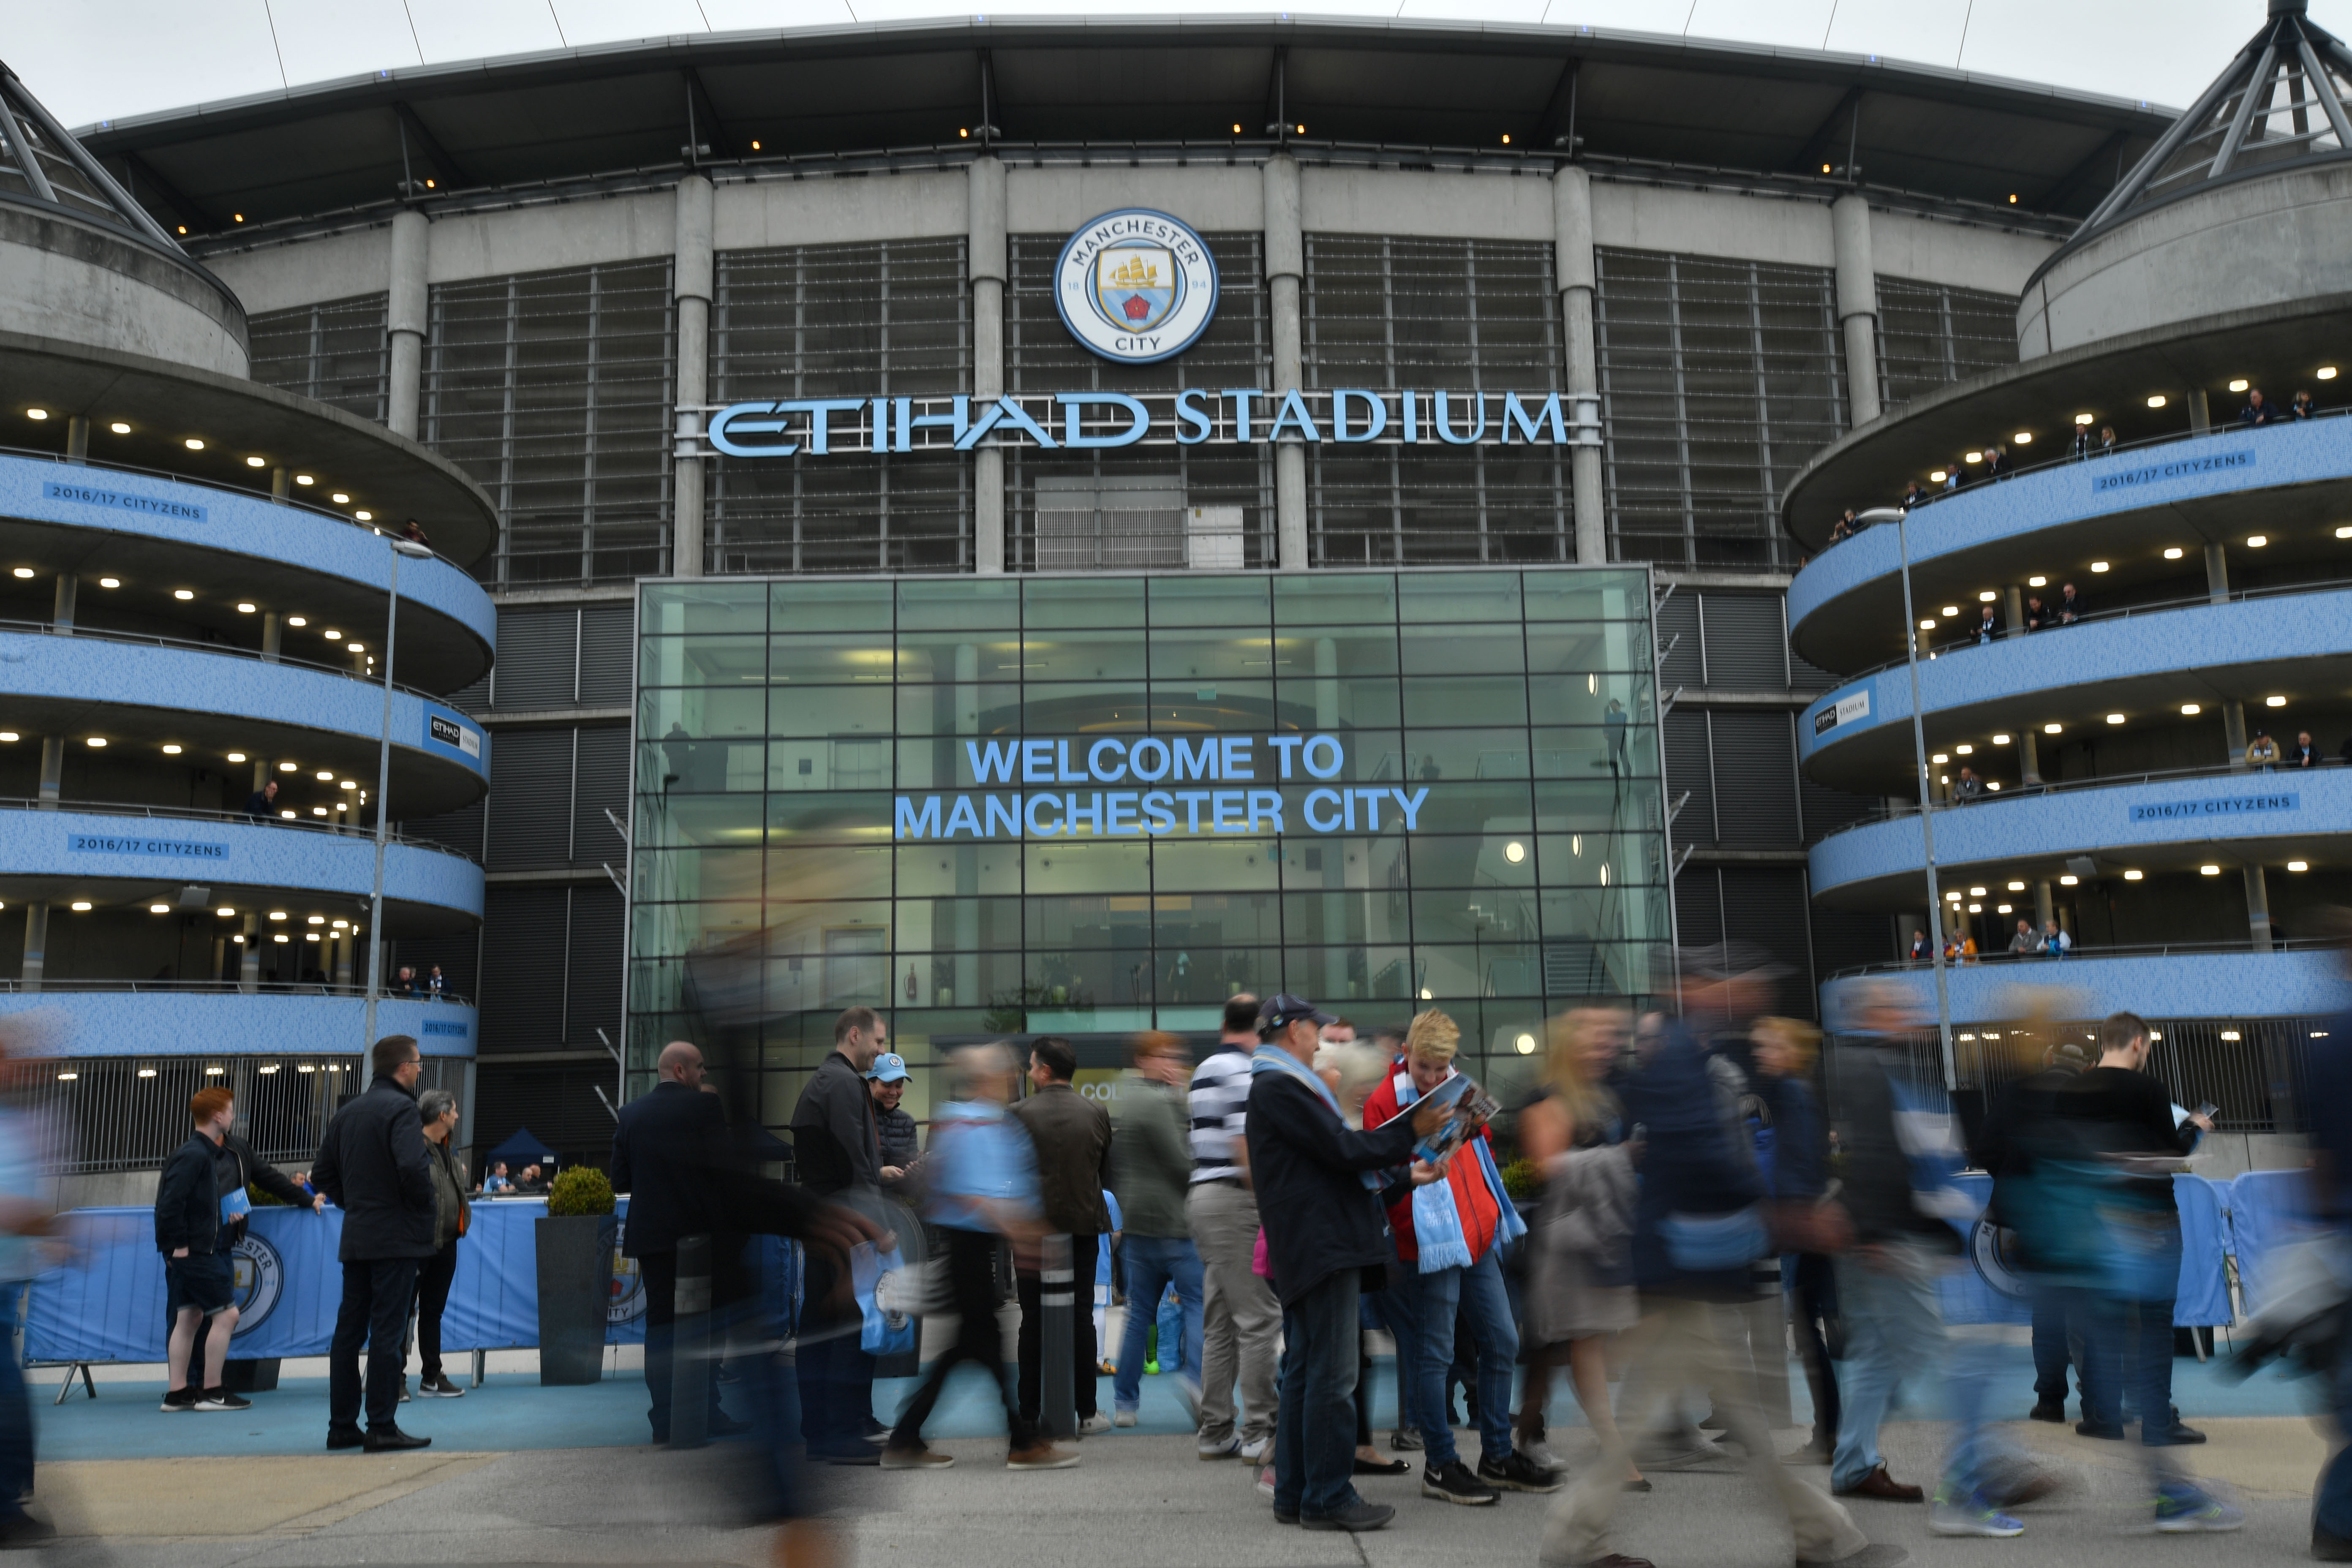 Supporters gather outside the stadium before the English Premier League football match between Manchester City and Everton at the Etihad Stadium in Manchester, north west England, on August 21, 2017. / AFP PHOTO / Anthony DEVLIN / RESTRICTED TO EDITORIAL USE. No use with unauthorized audio, video, data, fixture lists, club/league logos or 'live' services. Online in-match use limited to 75 images, no video emulation. No use in betting, games or single club/league/player publications.  /         (Photo credit should read ANTHONY DEVLIN/AFP/Getty Images)